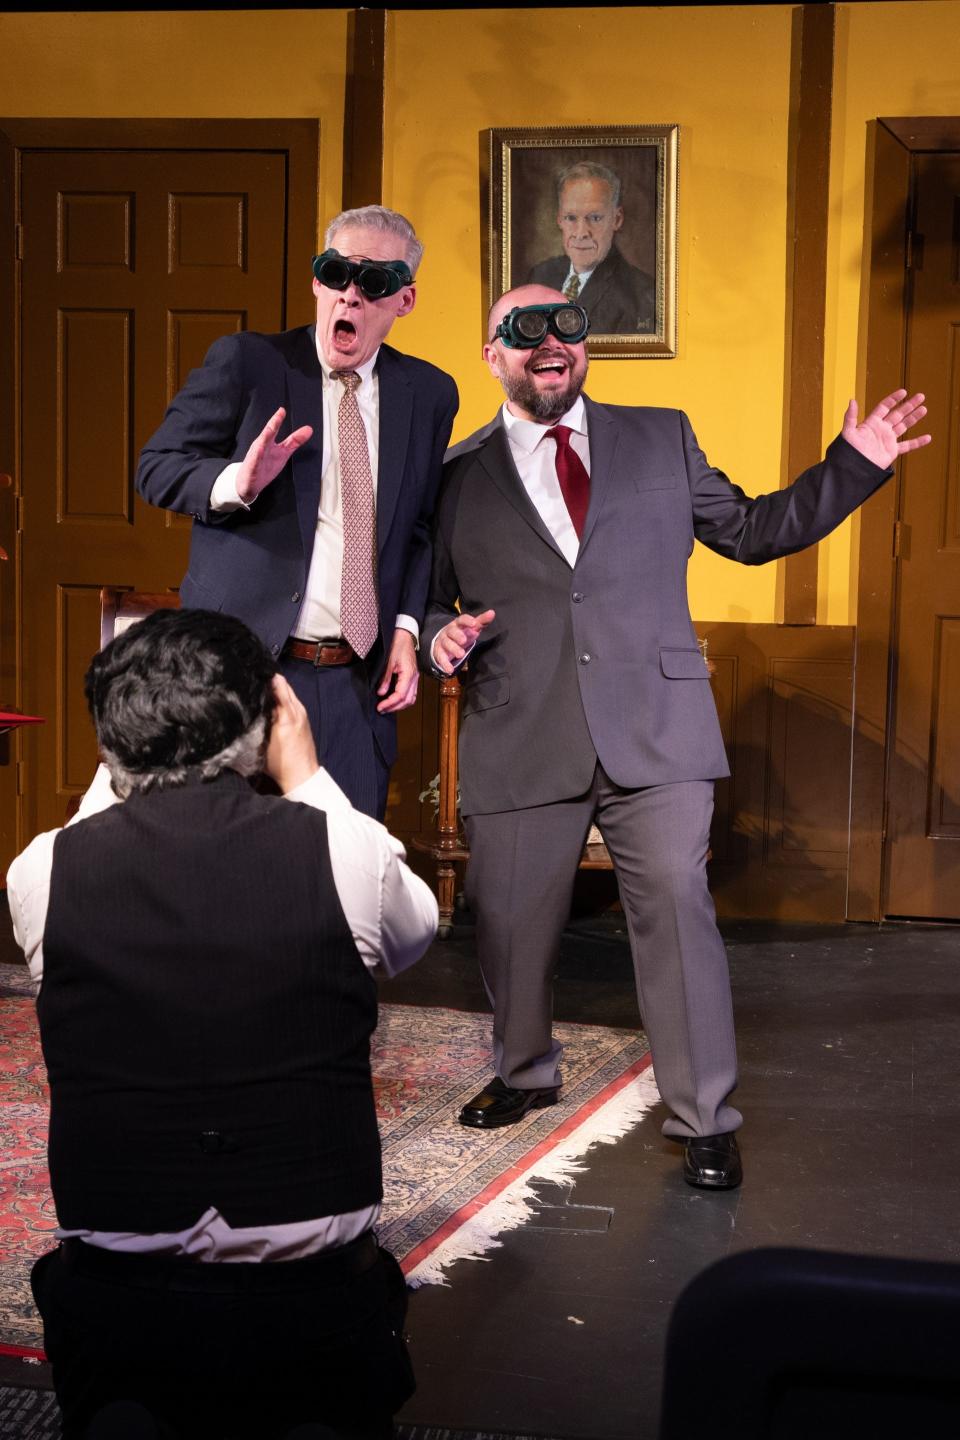 Bobcat Players present their latest play this weekend, "The President or One, Two, Three,"